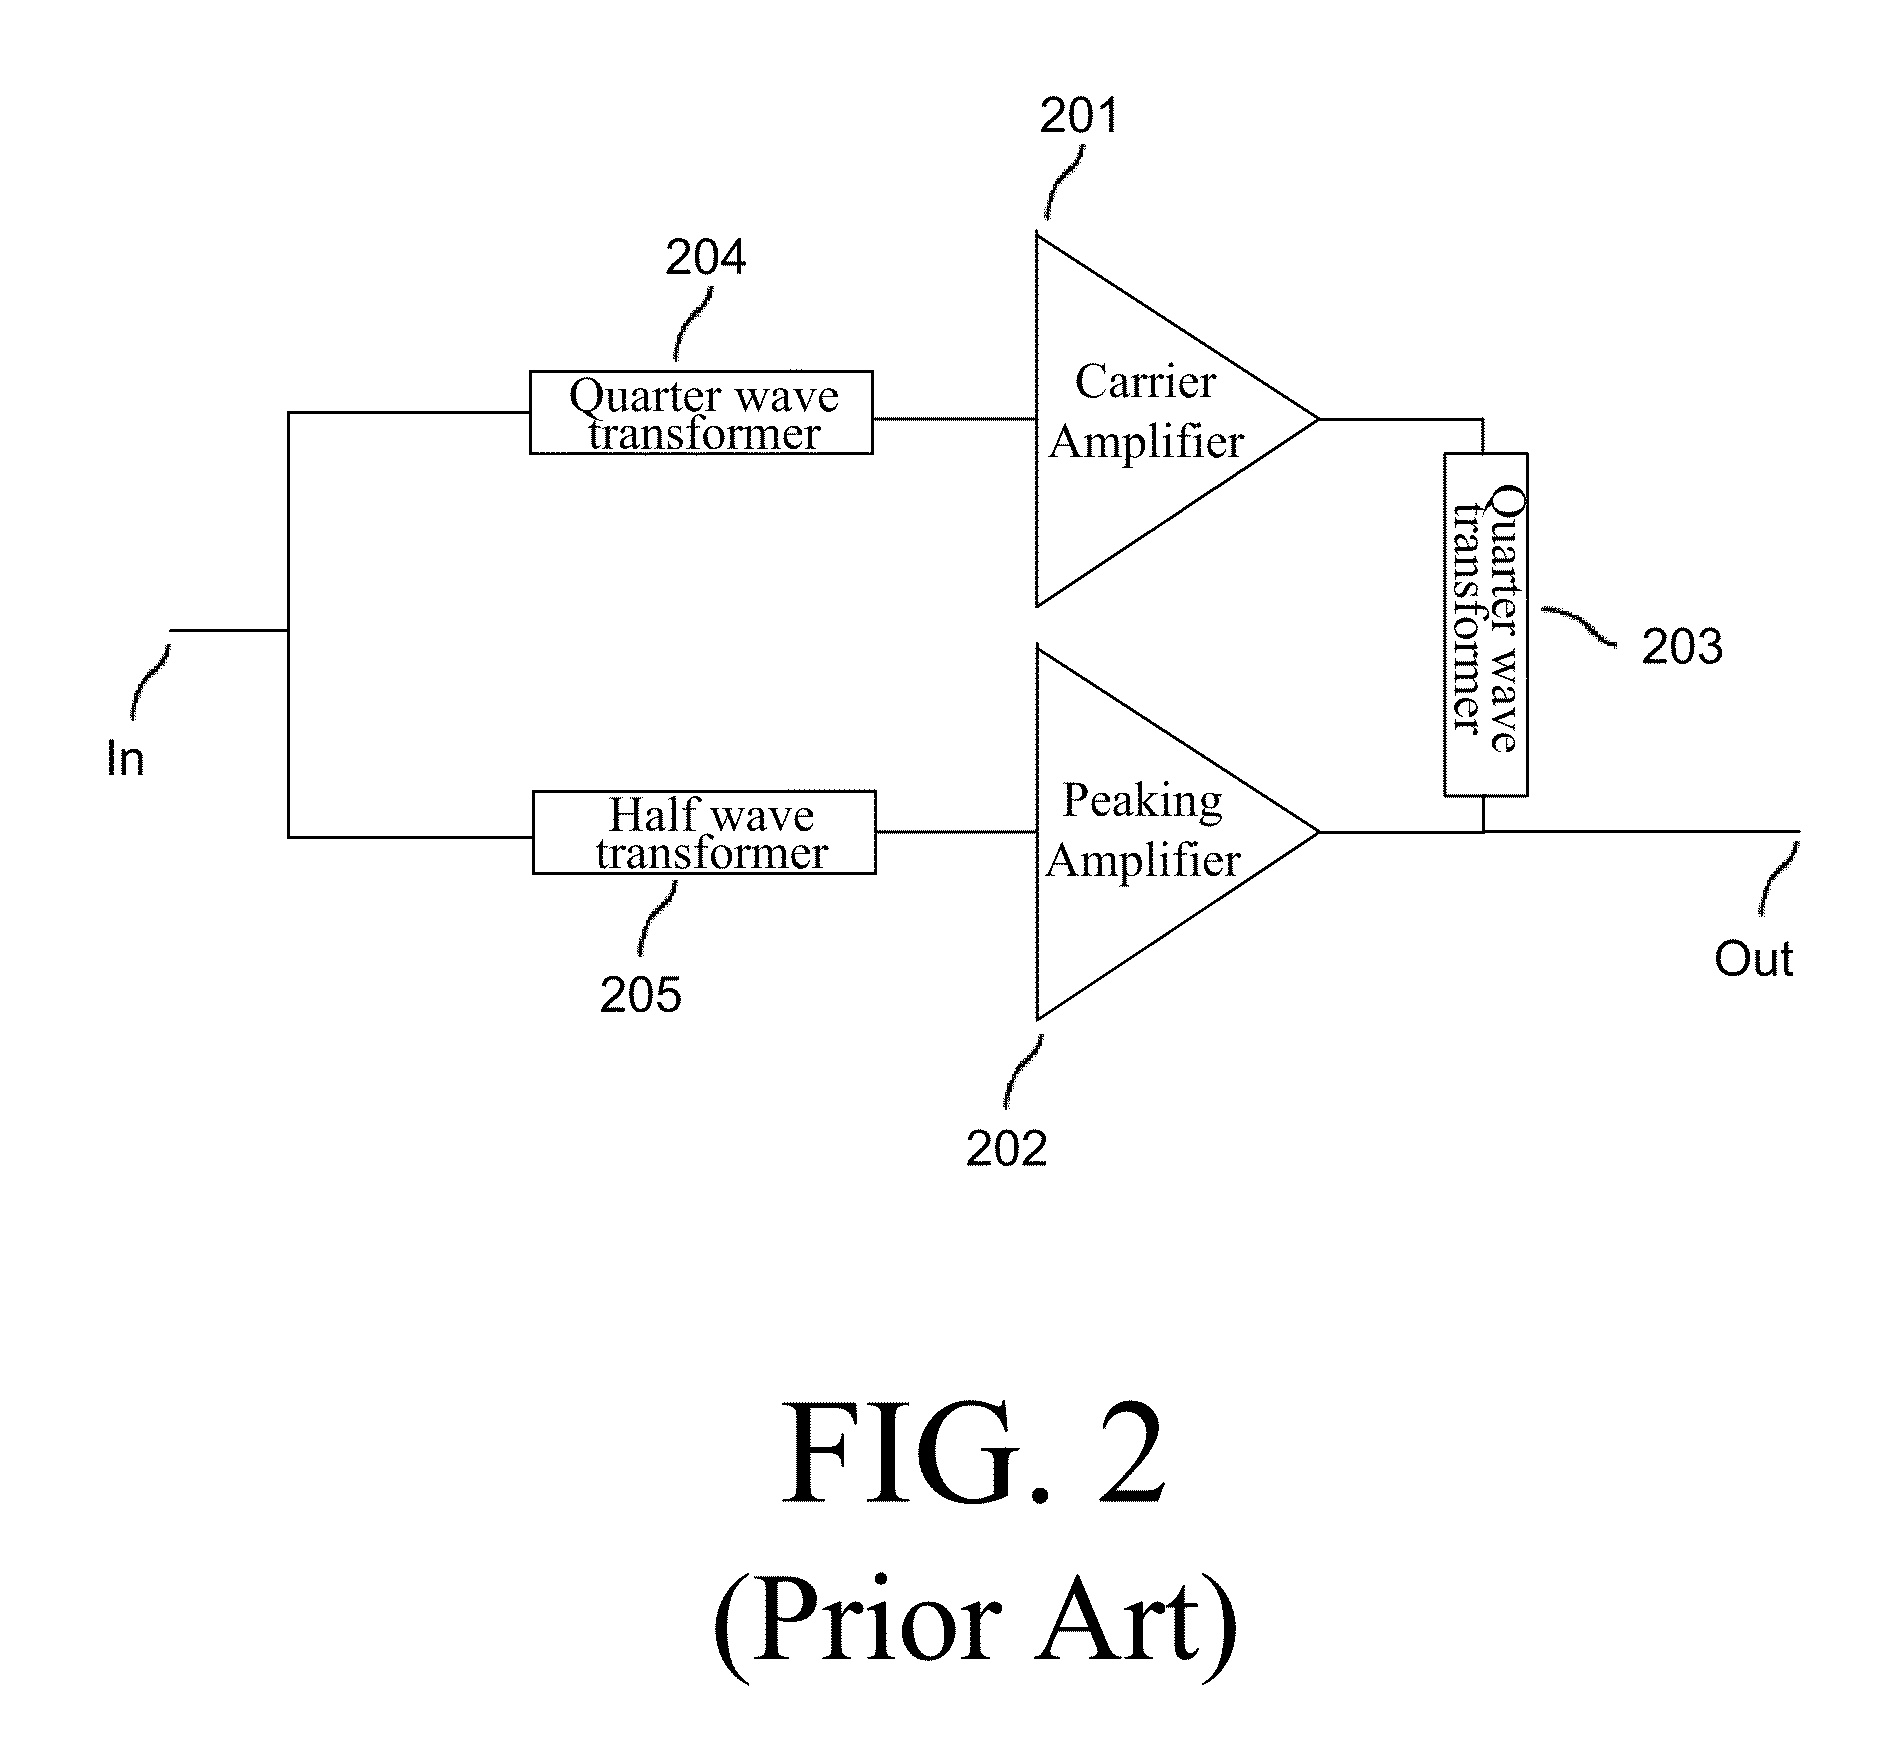 Integrated power amplifiers for use in wireless communication devices